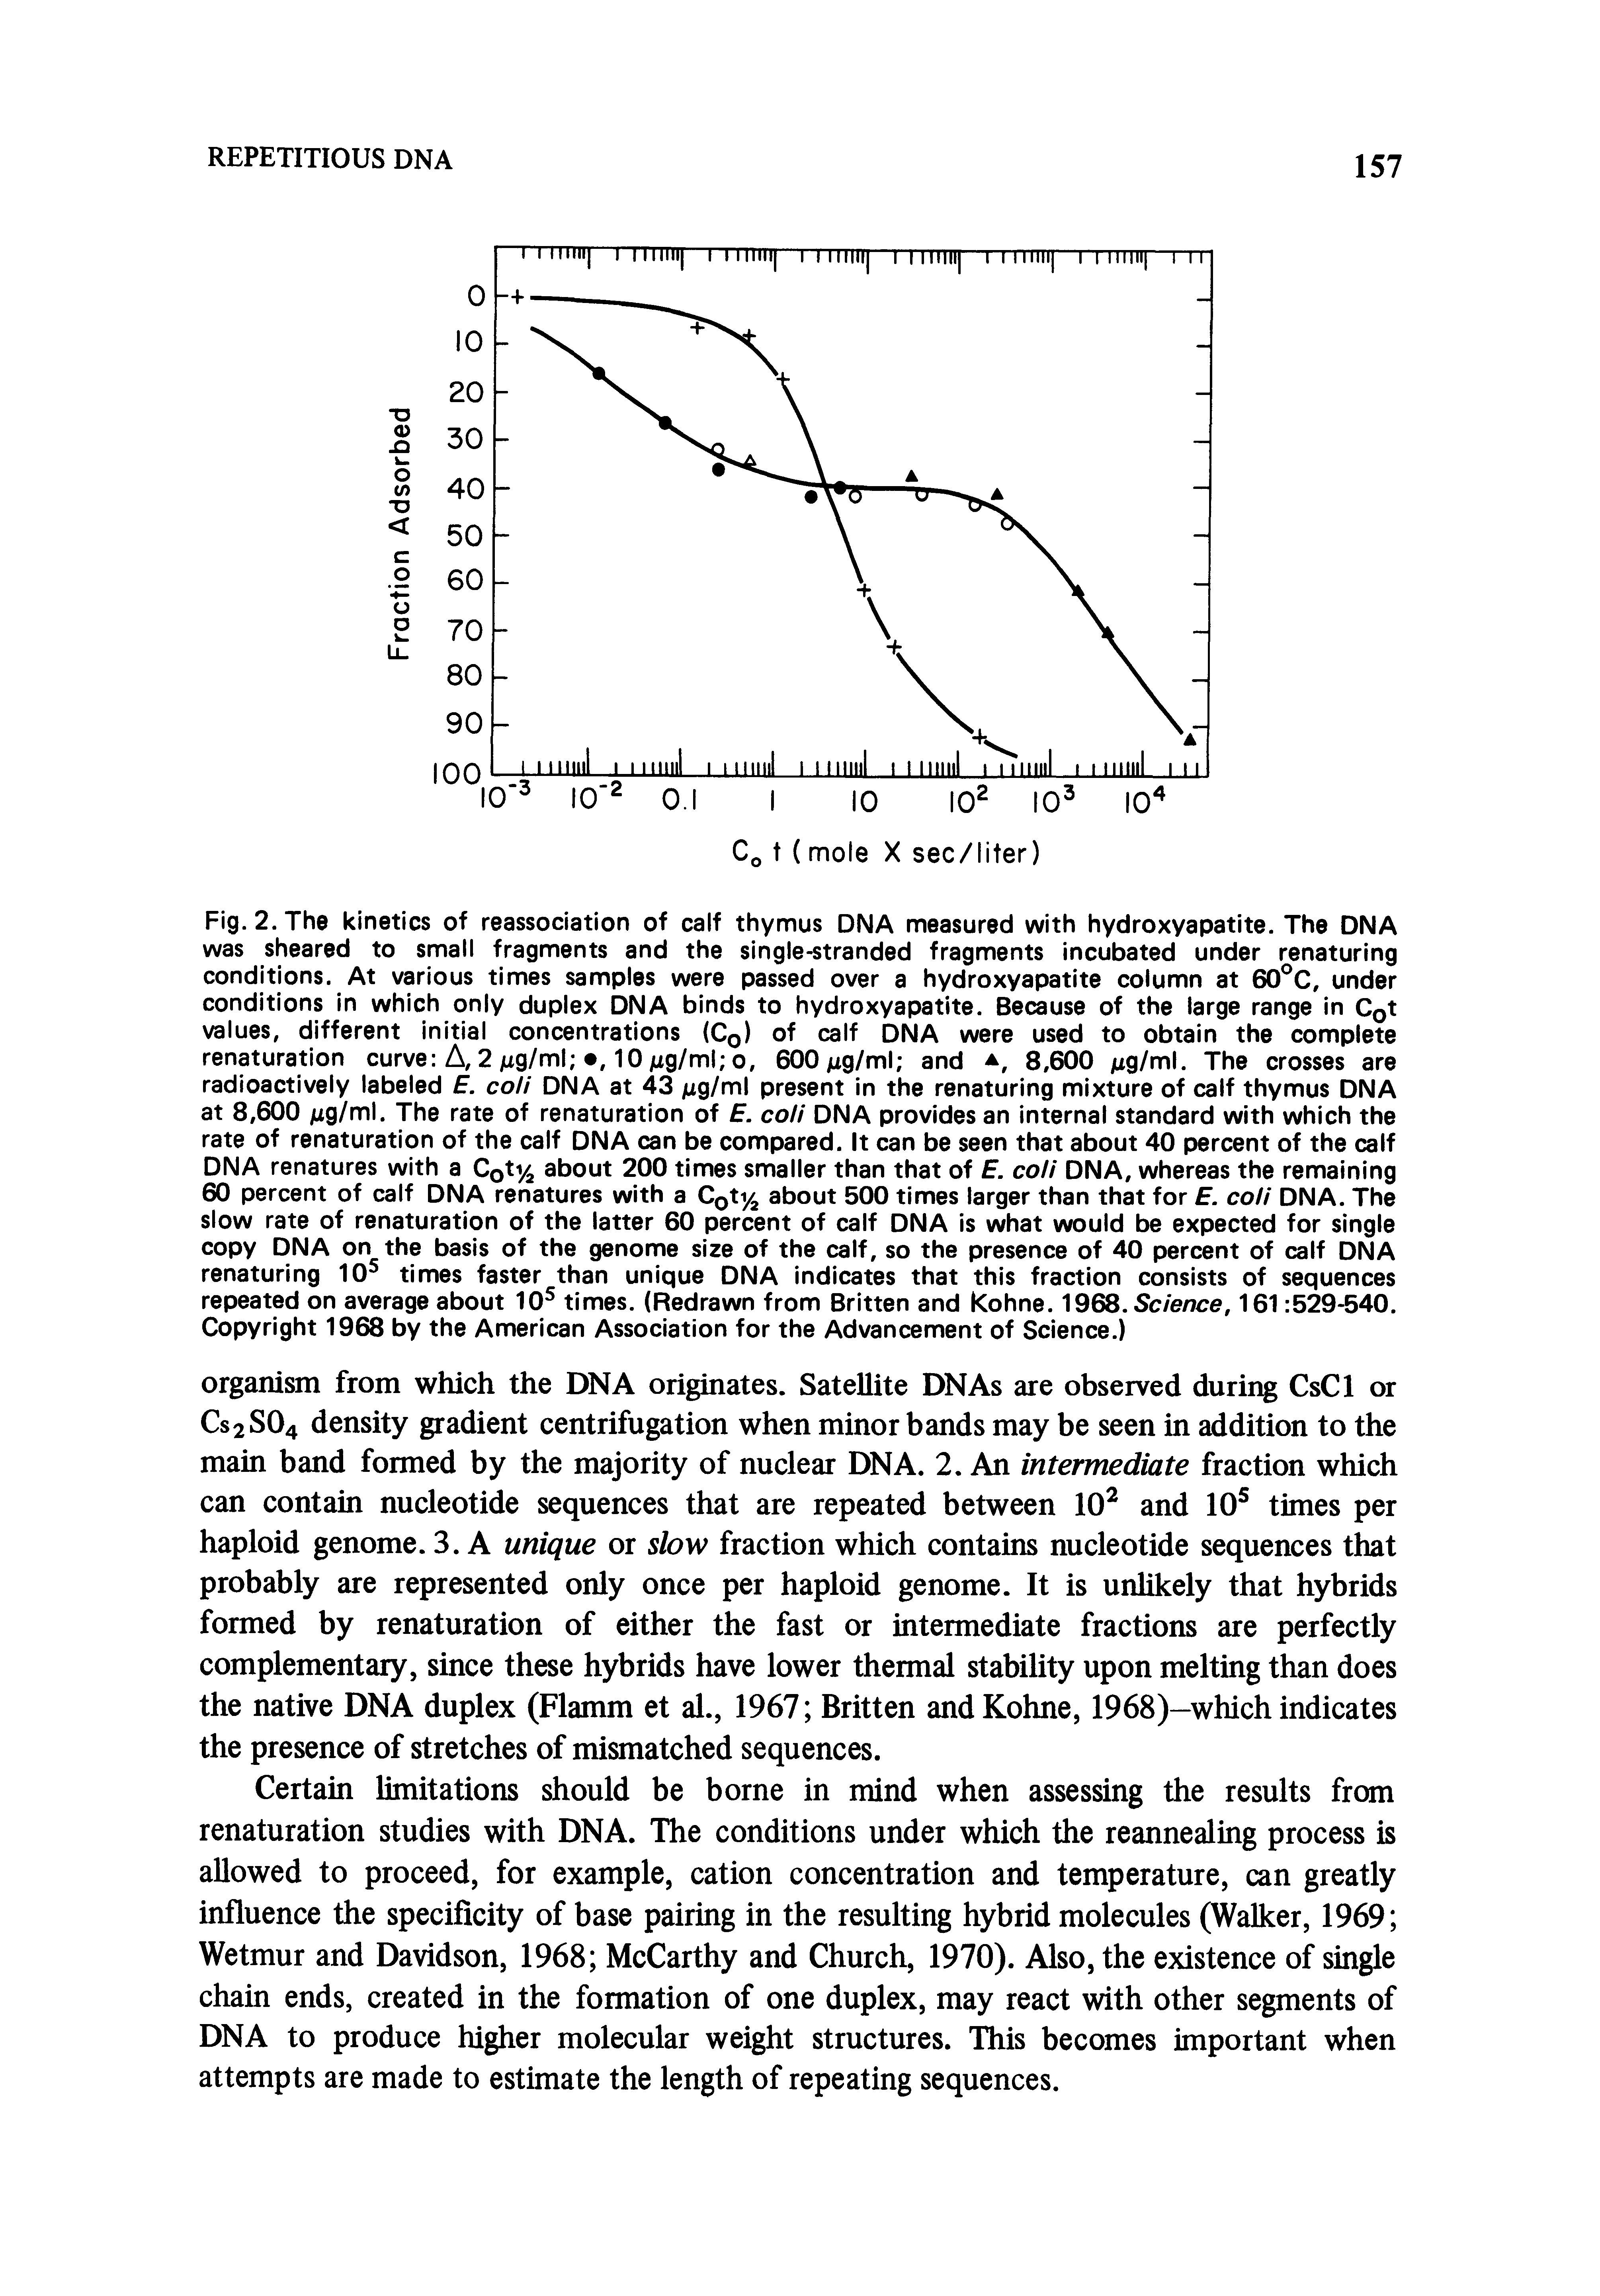 Fig. 2. The kinetics of reassociation of calf thymus DNA measured with hydroxyapatite. The DNA was sheared to small fragments and the single-stranded fragments incubated under renaturing conditions. At various times samples were passed over a hydroxyapatite column at 60 C, under conditions in which only duplex DNA binds to hydroxyapatite. Because of the large range in Cot values, different initial concentrations (Cq) of calf DNA were used to obtain the complete renaturation curve A, 2 jug/nni , 10/xg/ml o, 600Mg/ml and 8,600 /ug/ml. The crosses are radioactively labeled E. coli DNA at 43 jug/ml present in the renaturing mixture of calf thymus DNA at 8,600 The rate of renaturation of E. coli DNA provides an internal standard with which the...